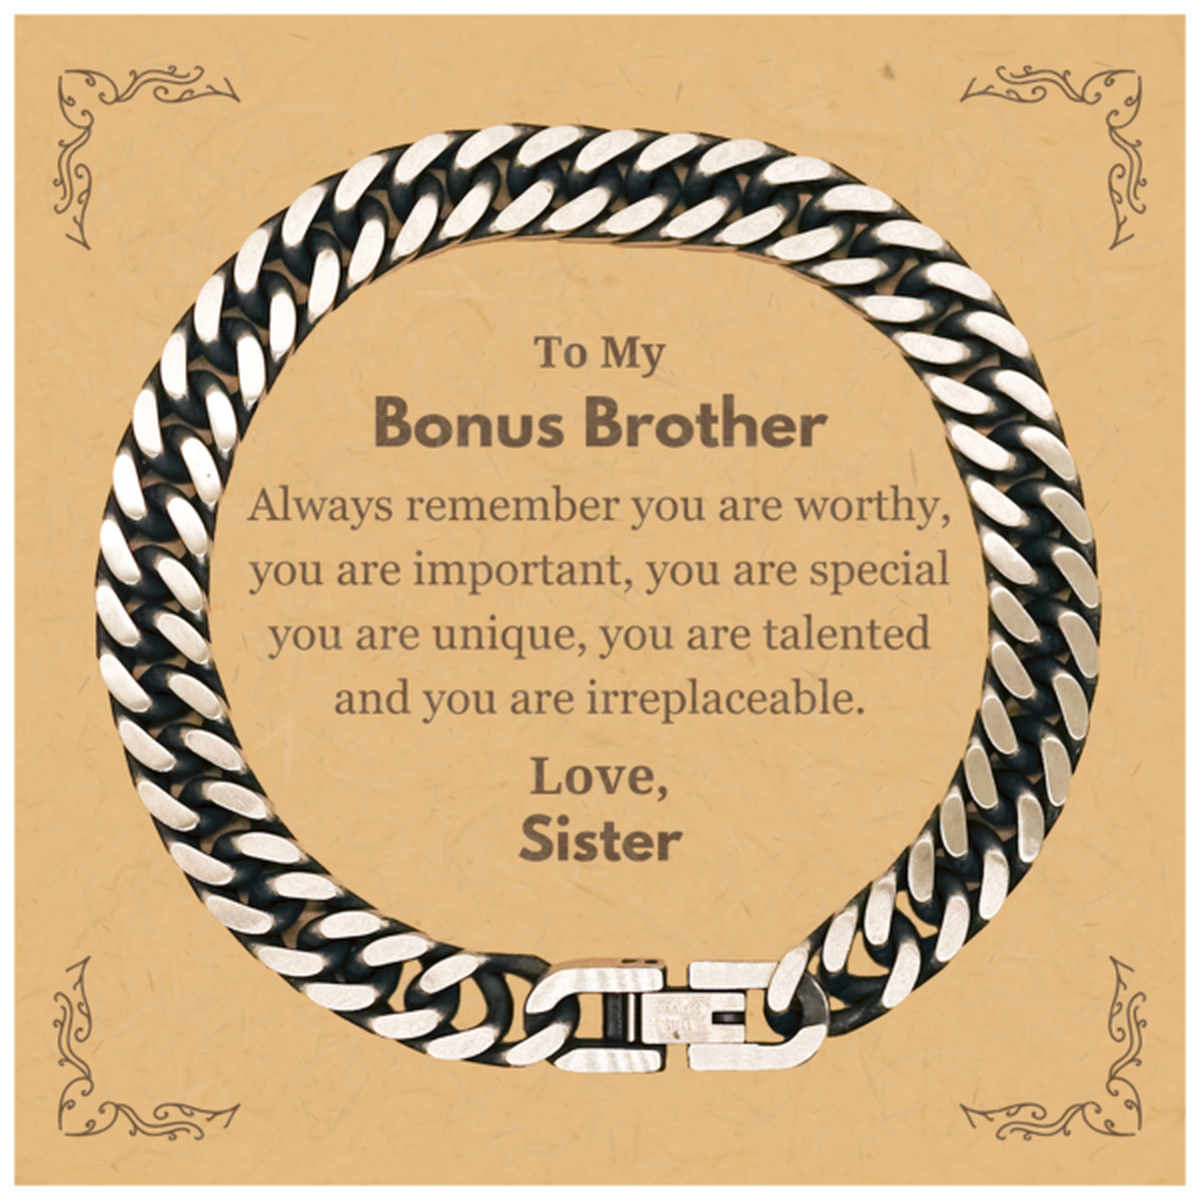 Bonus Brother Birthday Gifts from Sister, Inspirational Cuban Link Chain Bracelet for Bonus Brother Christmas Graduation Gifts for Bonus Brother Always remember you are worthy, you are important. Love, Sister